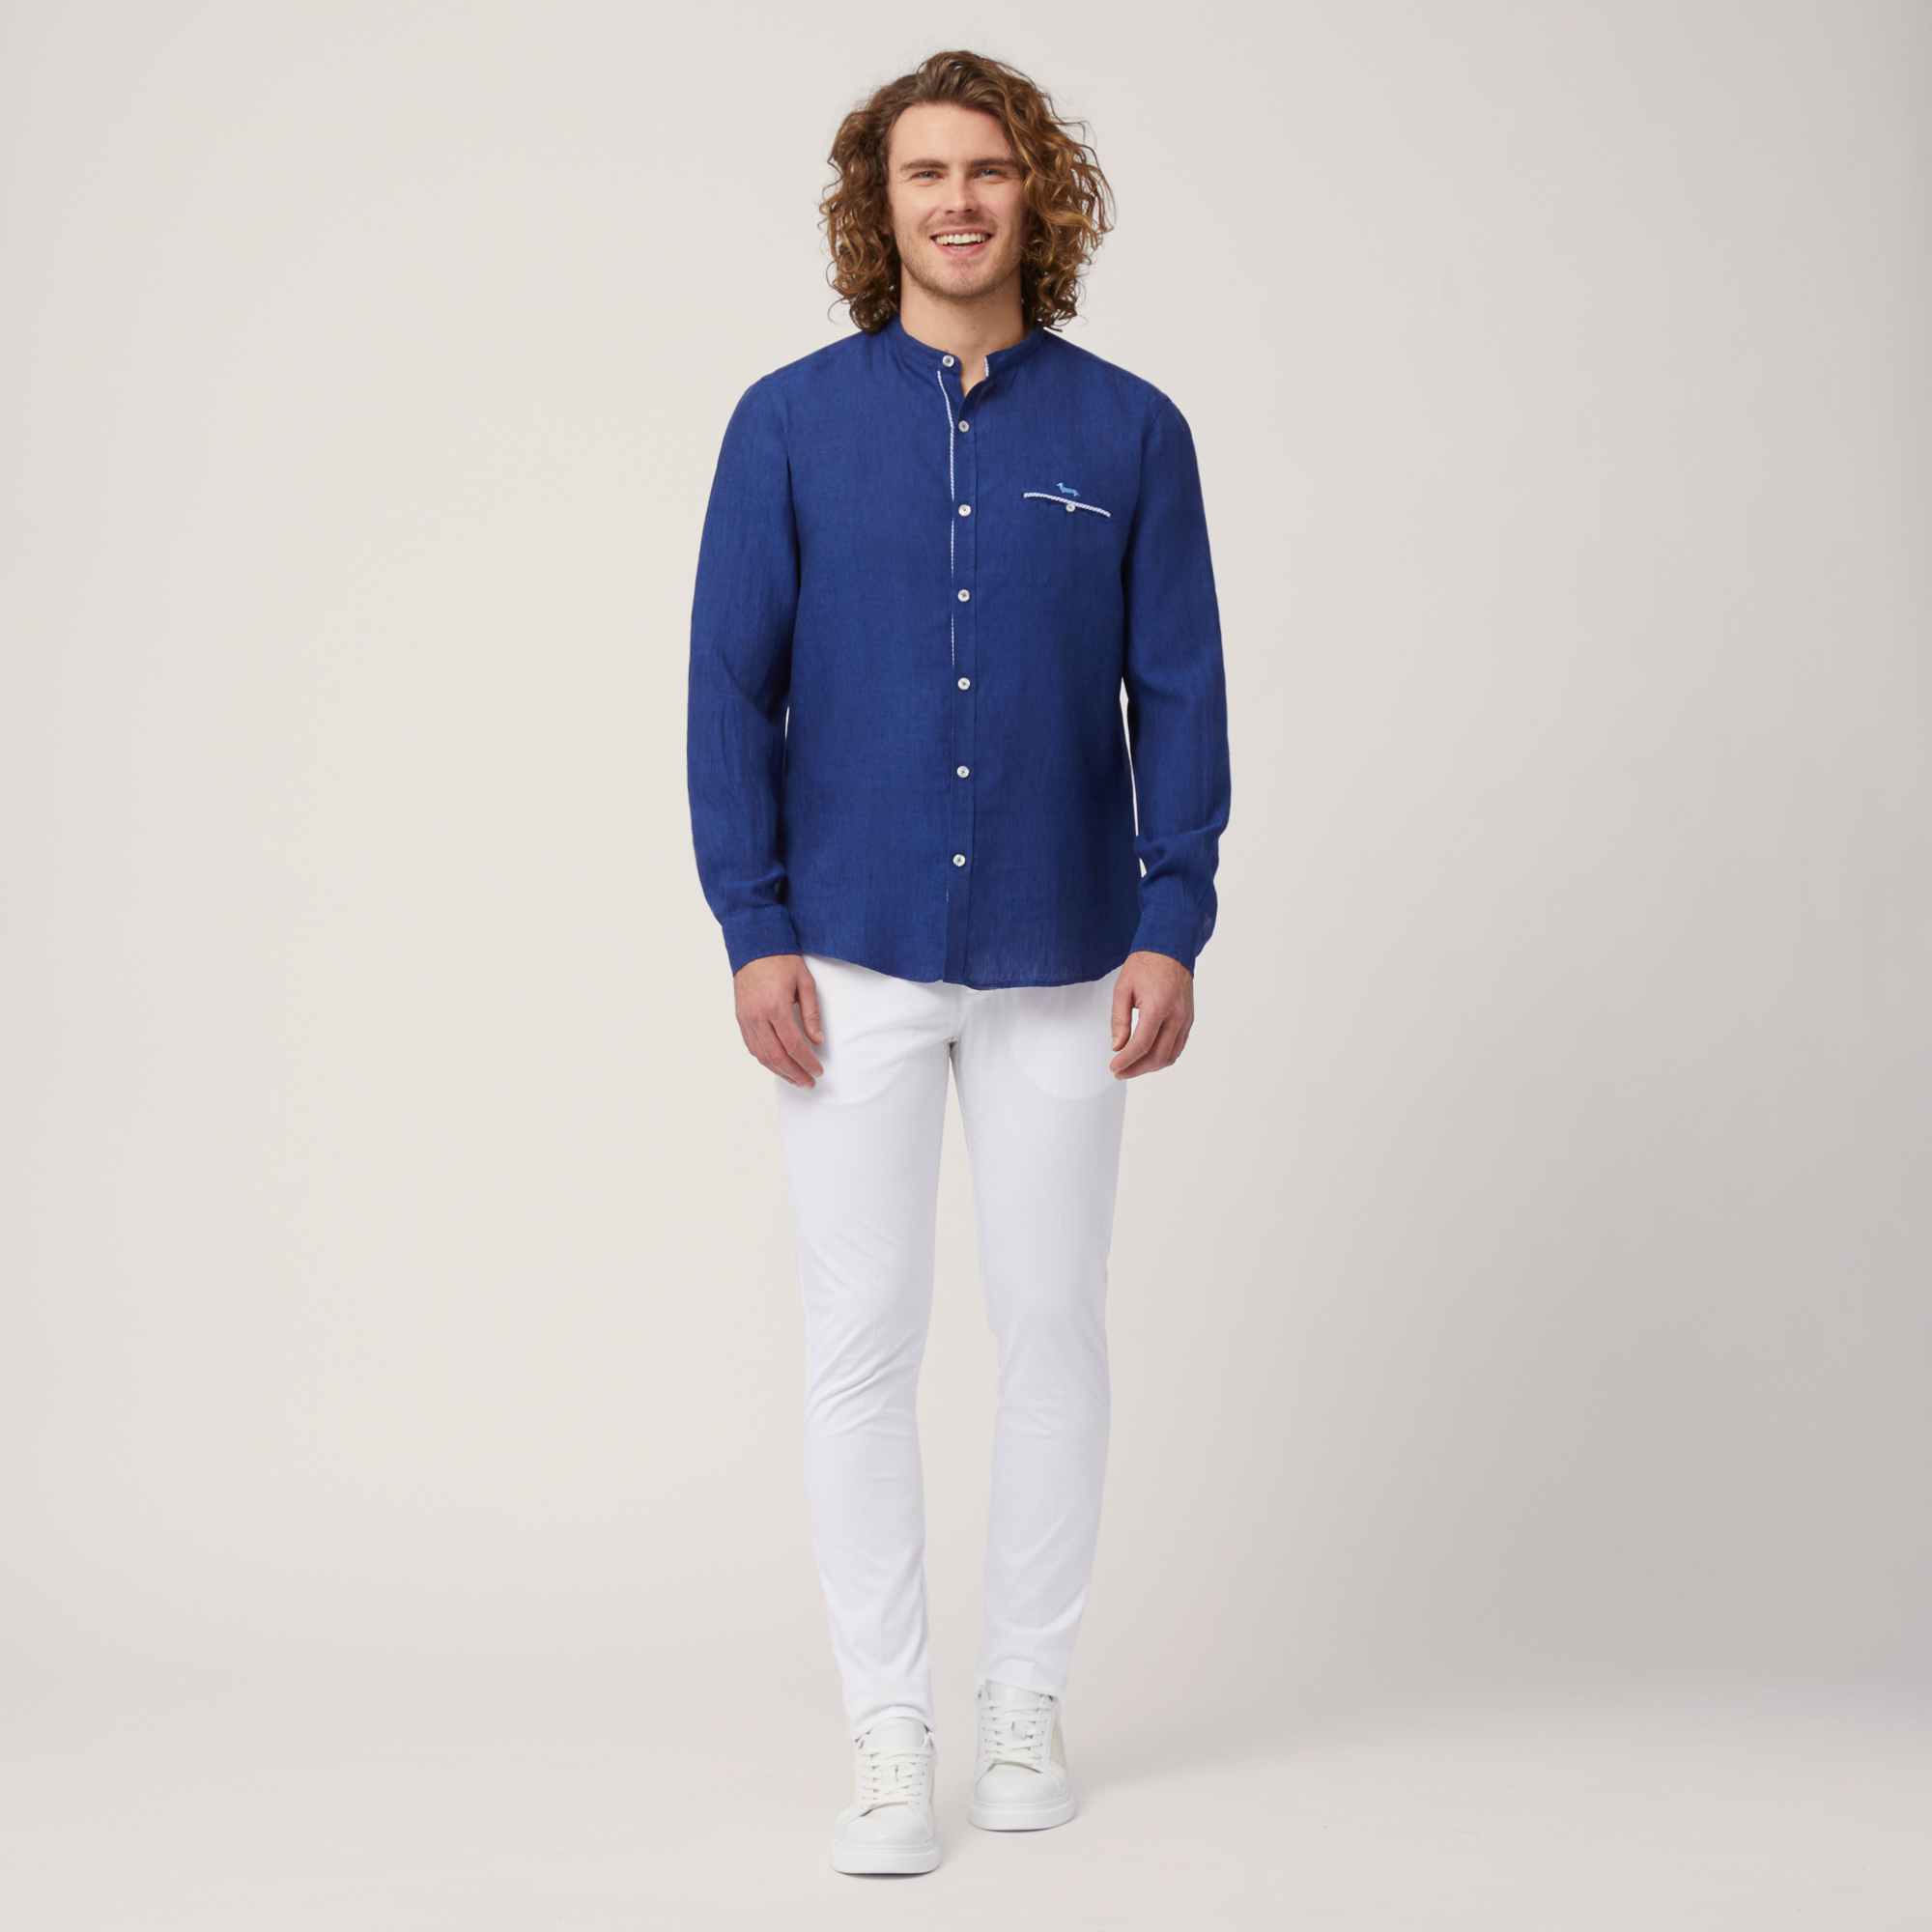 Linen Shirt with Mandarin Collar and Breast Pocket, Blue, large image number 3